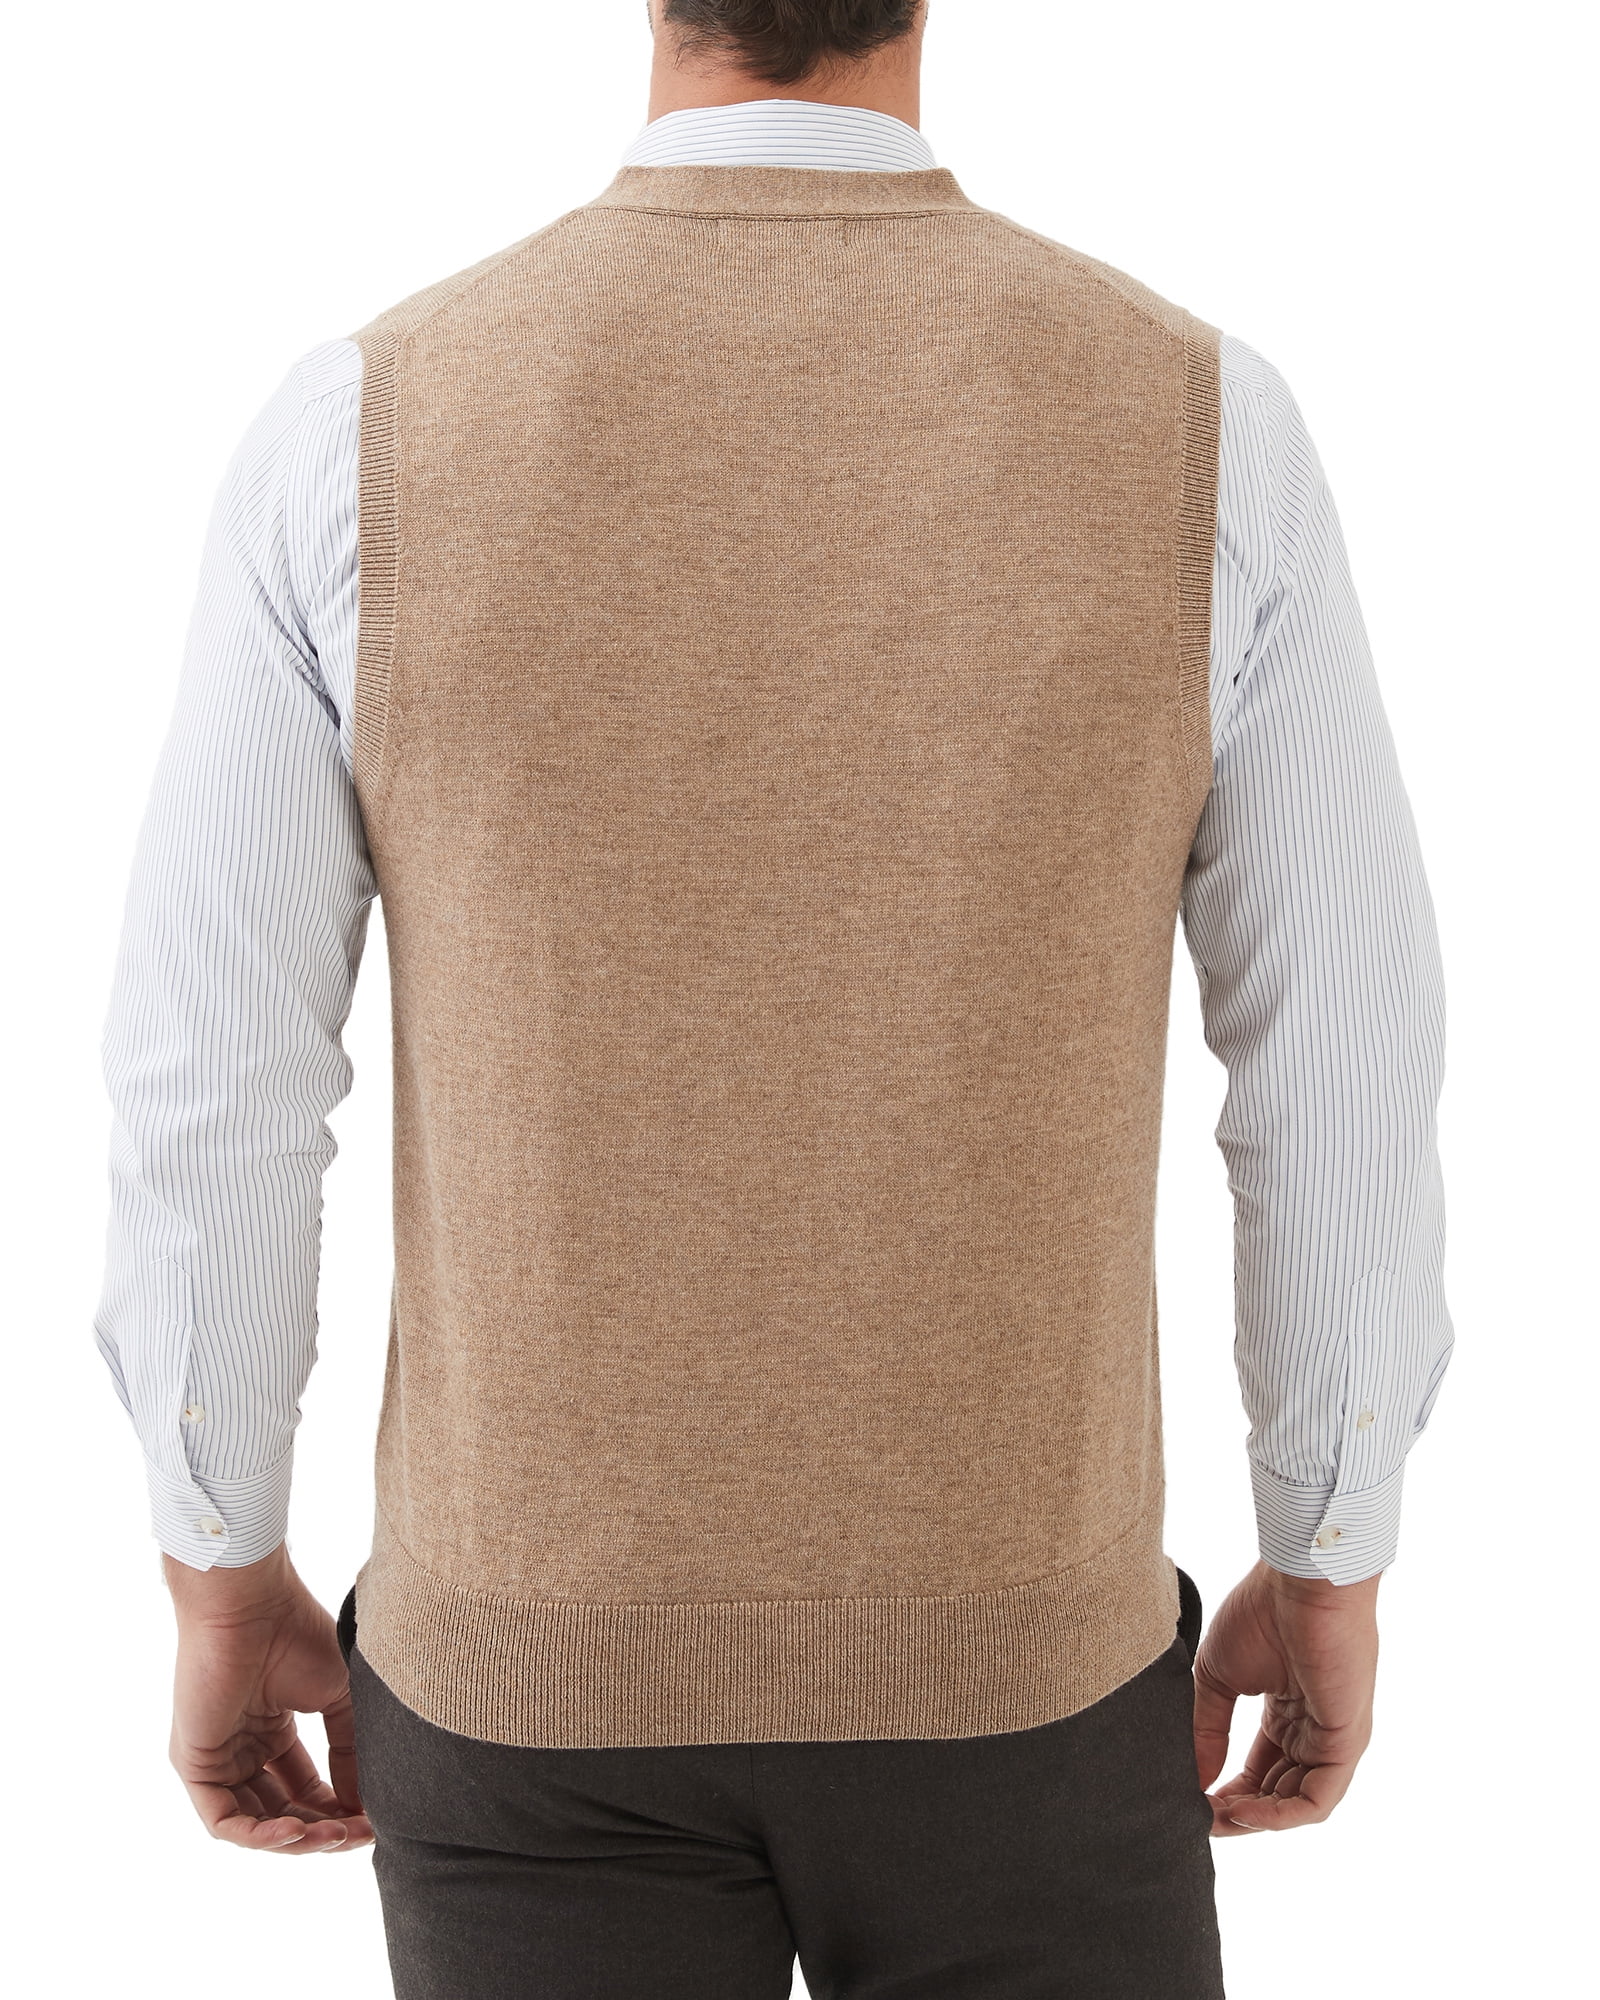 Mens Sweater Vest Cashmere Wool Blended V Neck Sleeveless Button Cardigan  Sweat⊹